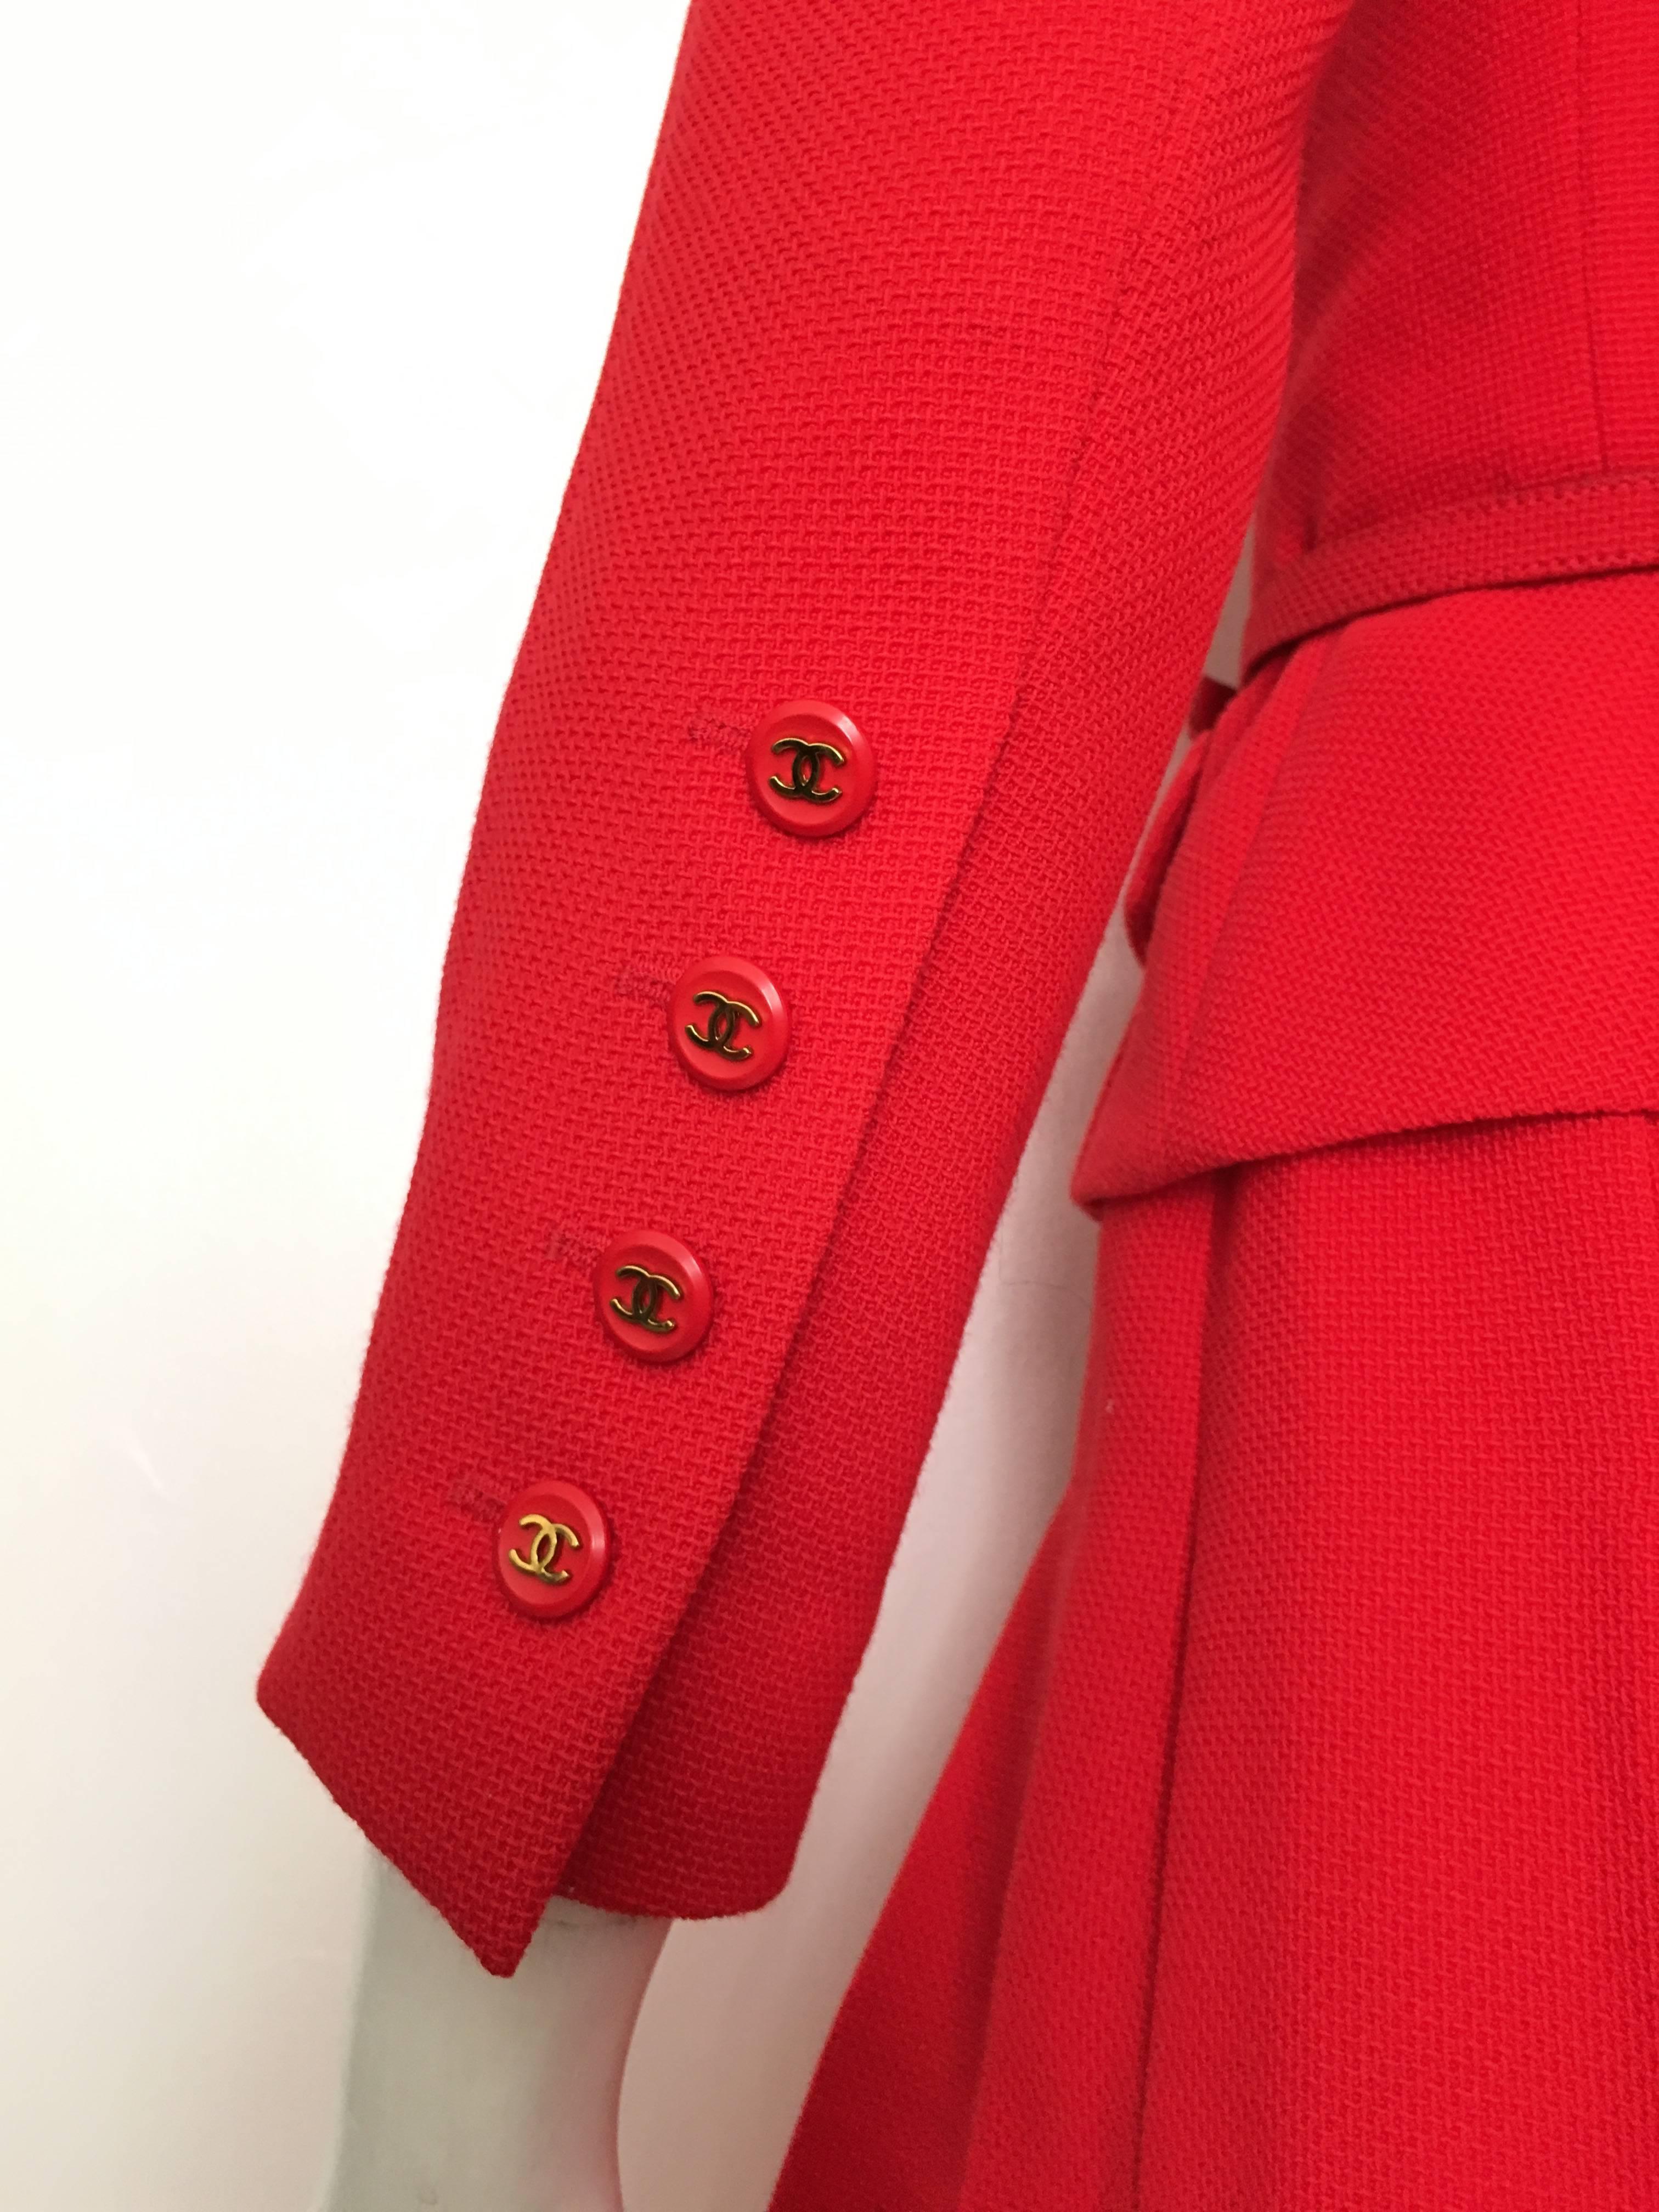 Chanel Red Suit Jacket & Pleated Skirt Size 4. 3